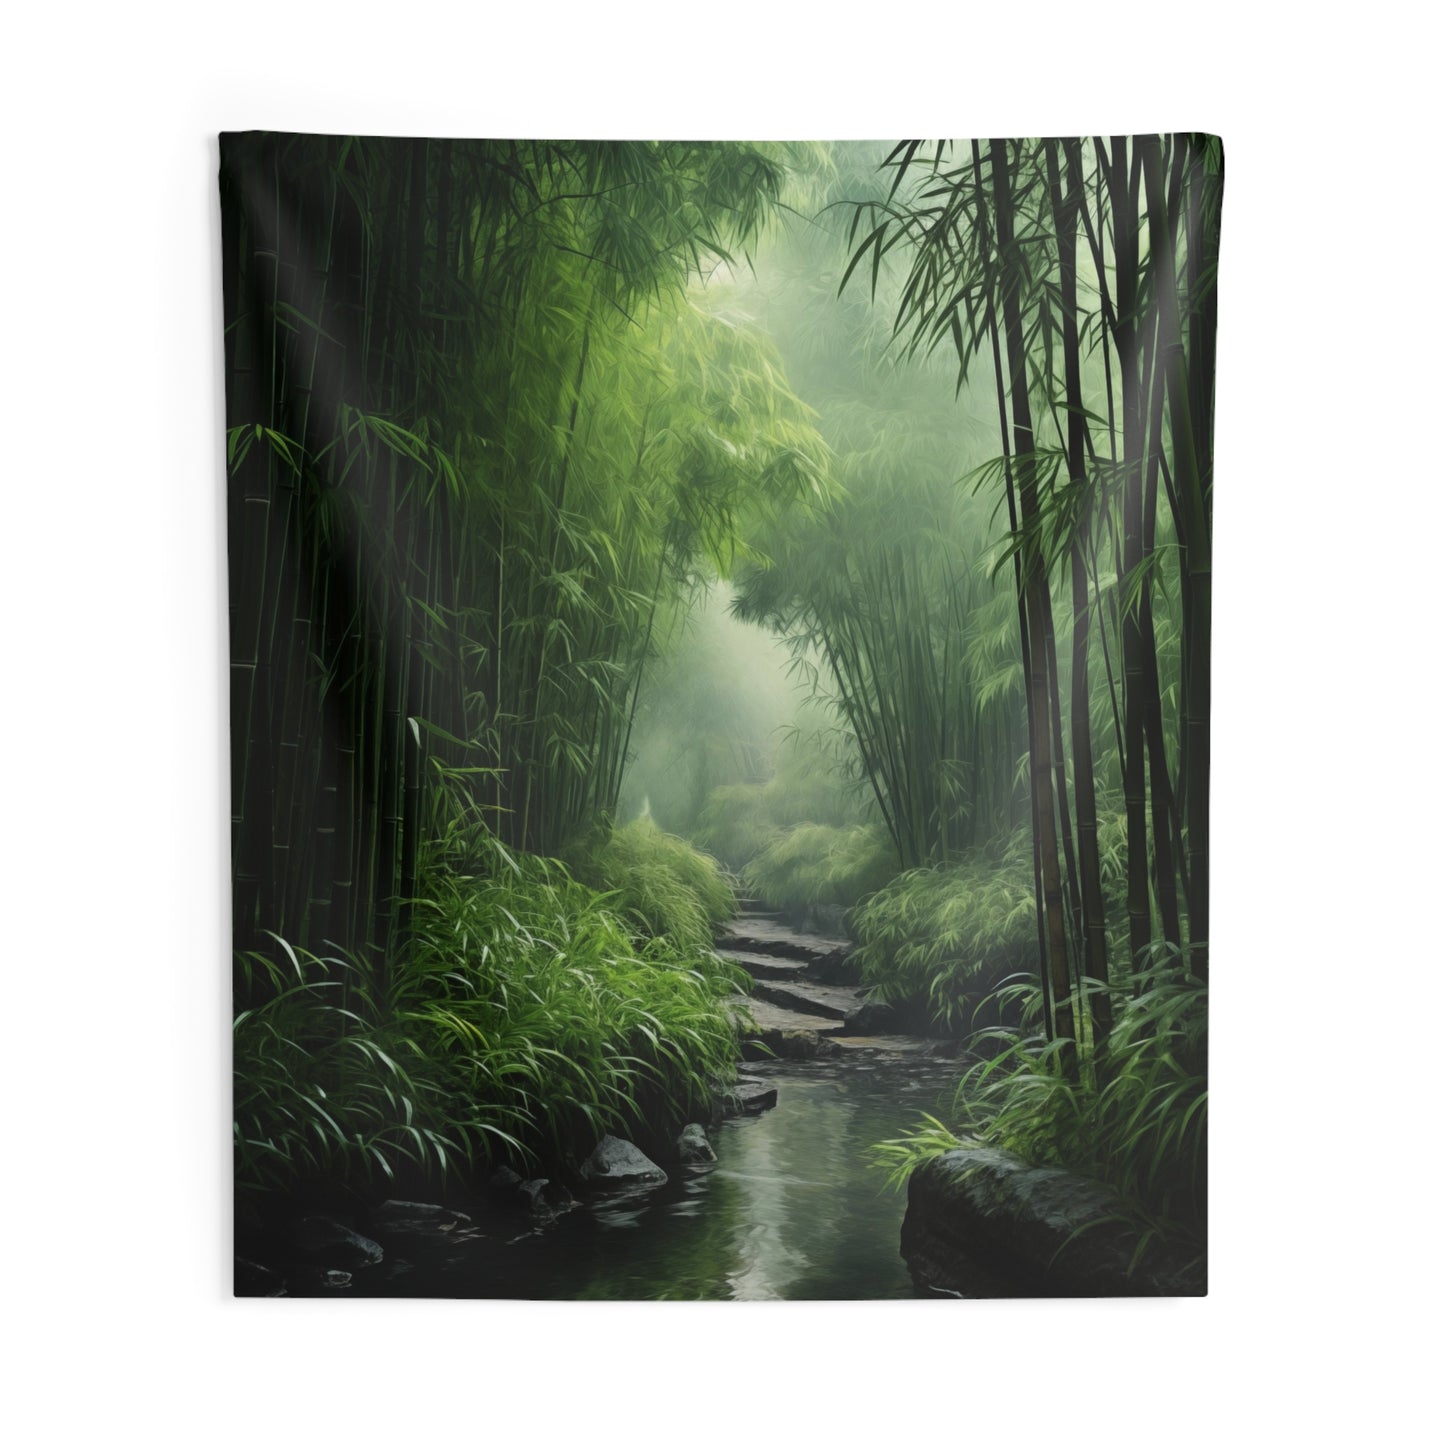 Bamboo Forest Tapestry, Green Nature Wall Art Hanging Cool Unique Vertical Aesthetic Large Small Decor Bedroom College Dorm Room